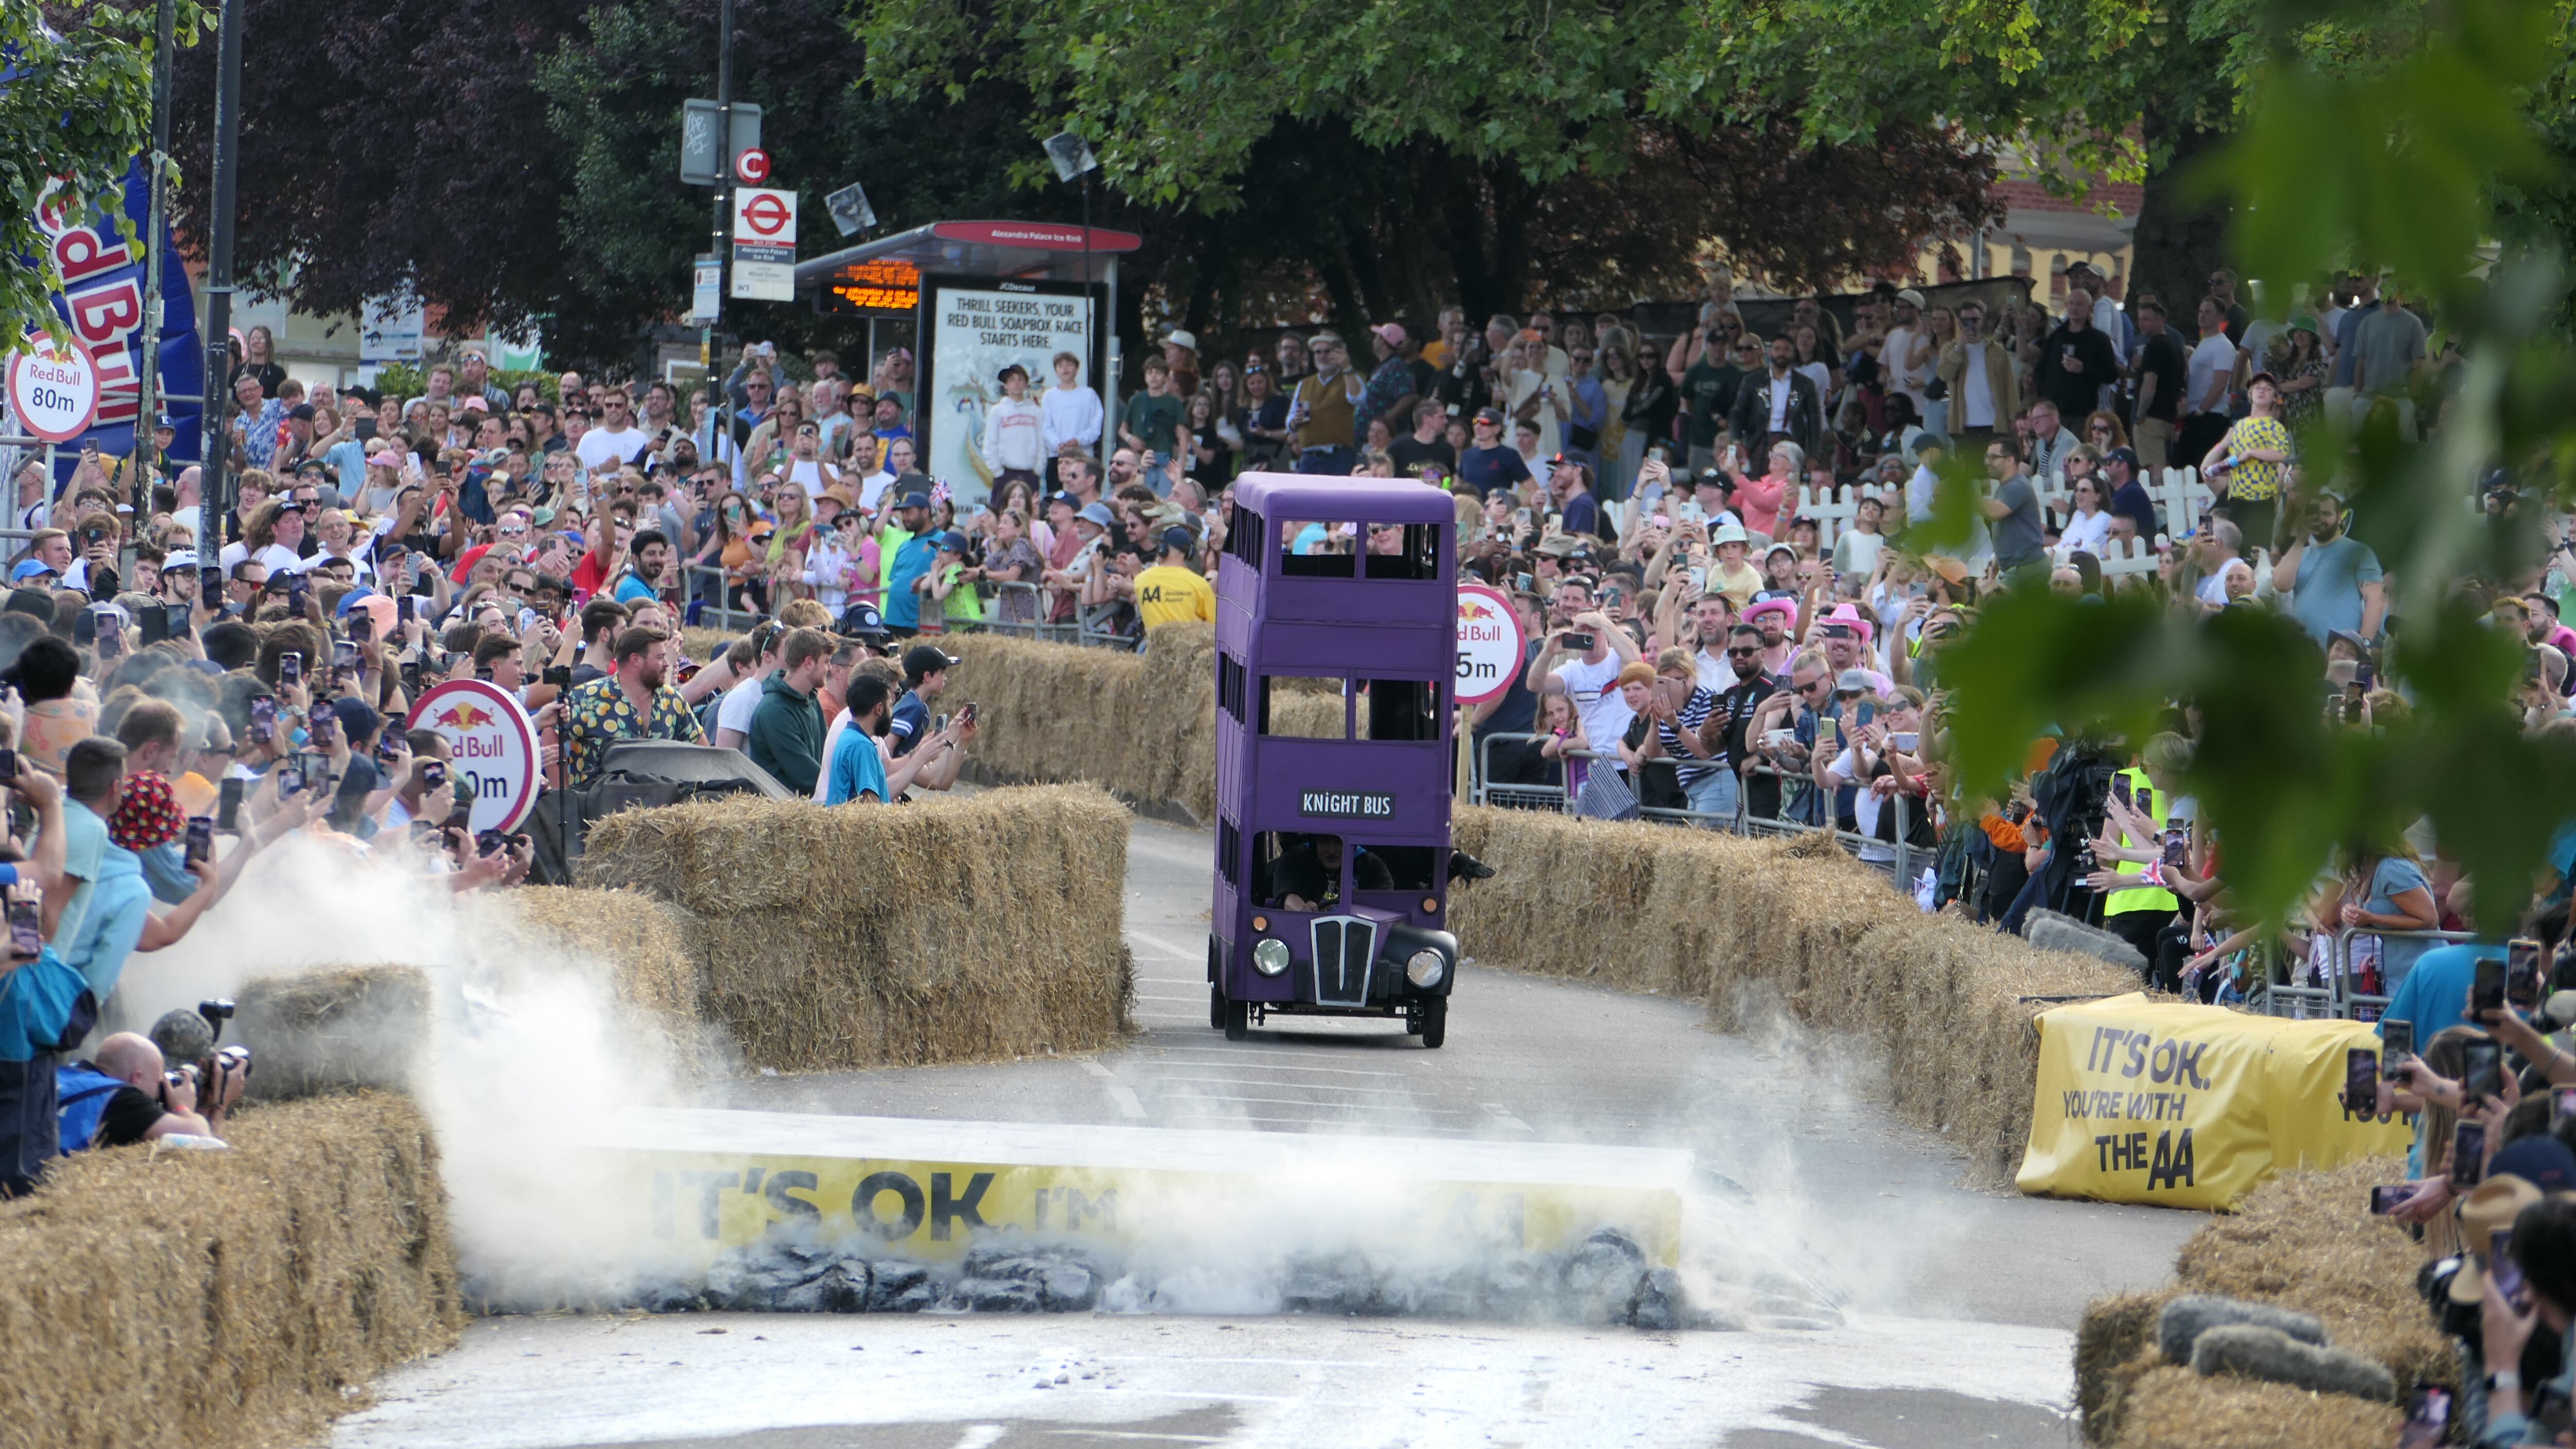 The Knight Bus soapbox in action